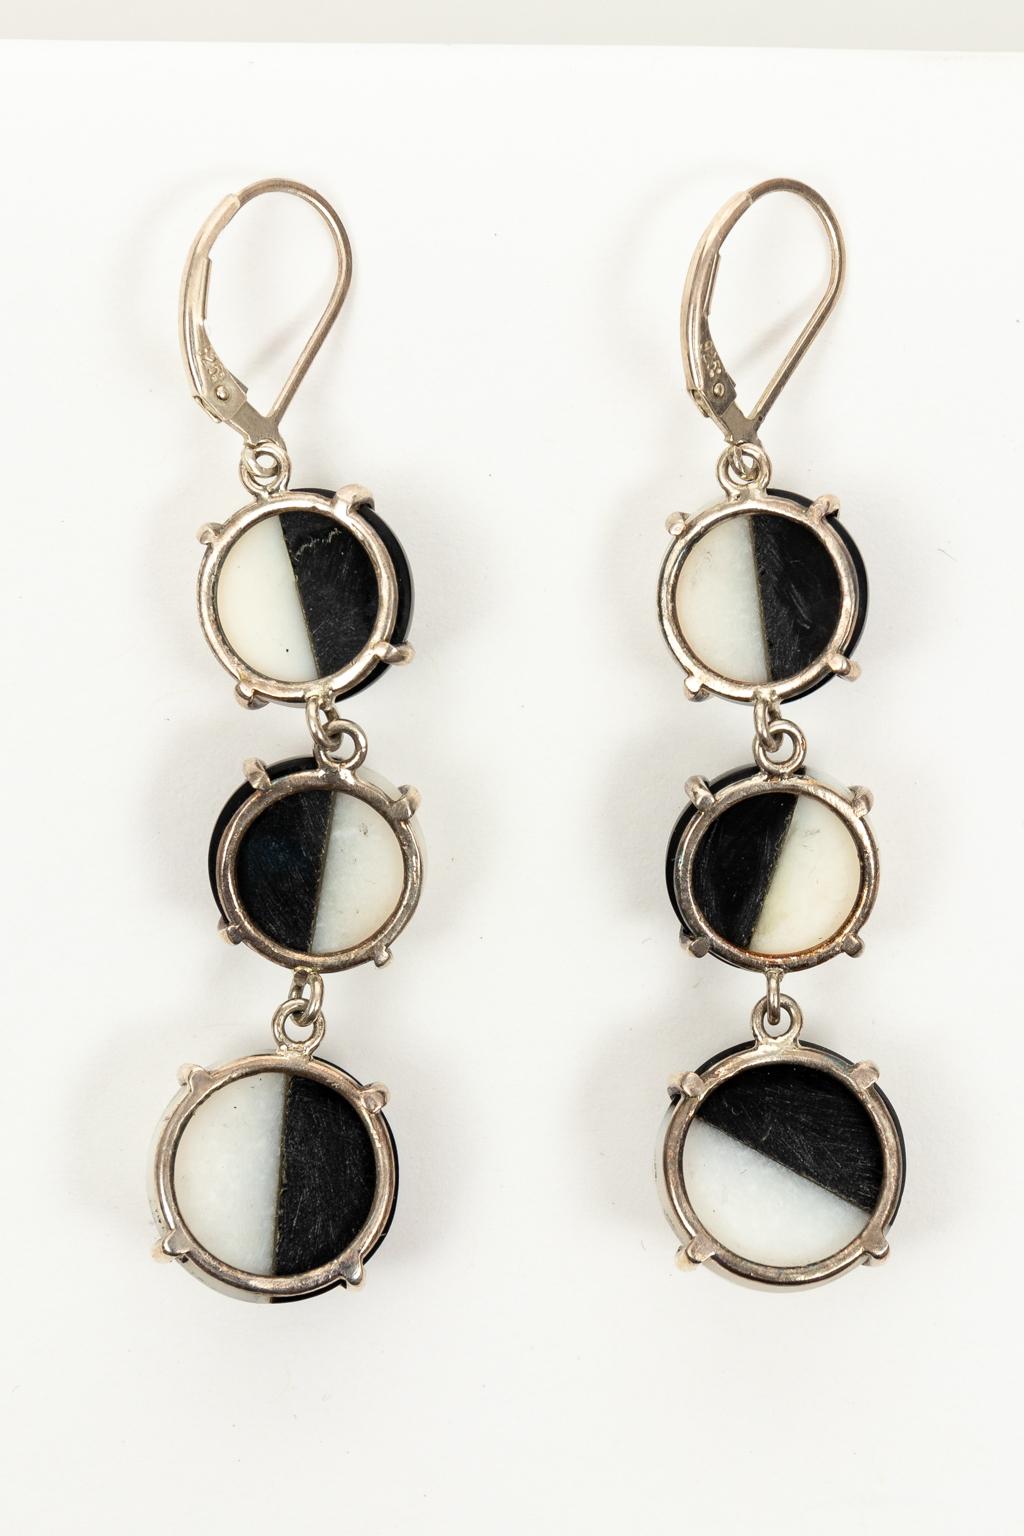 Pair of Black and White Onyx Split Cabochon Disc Earrings Titled 